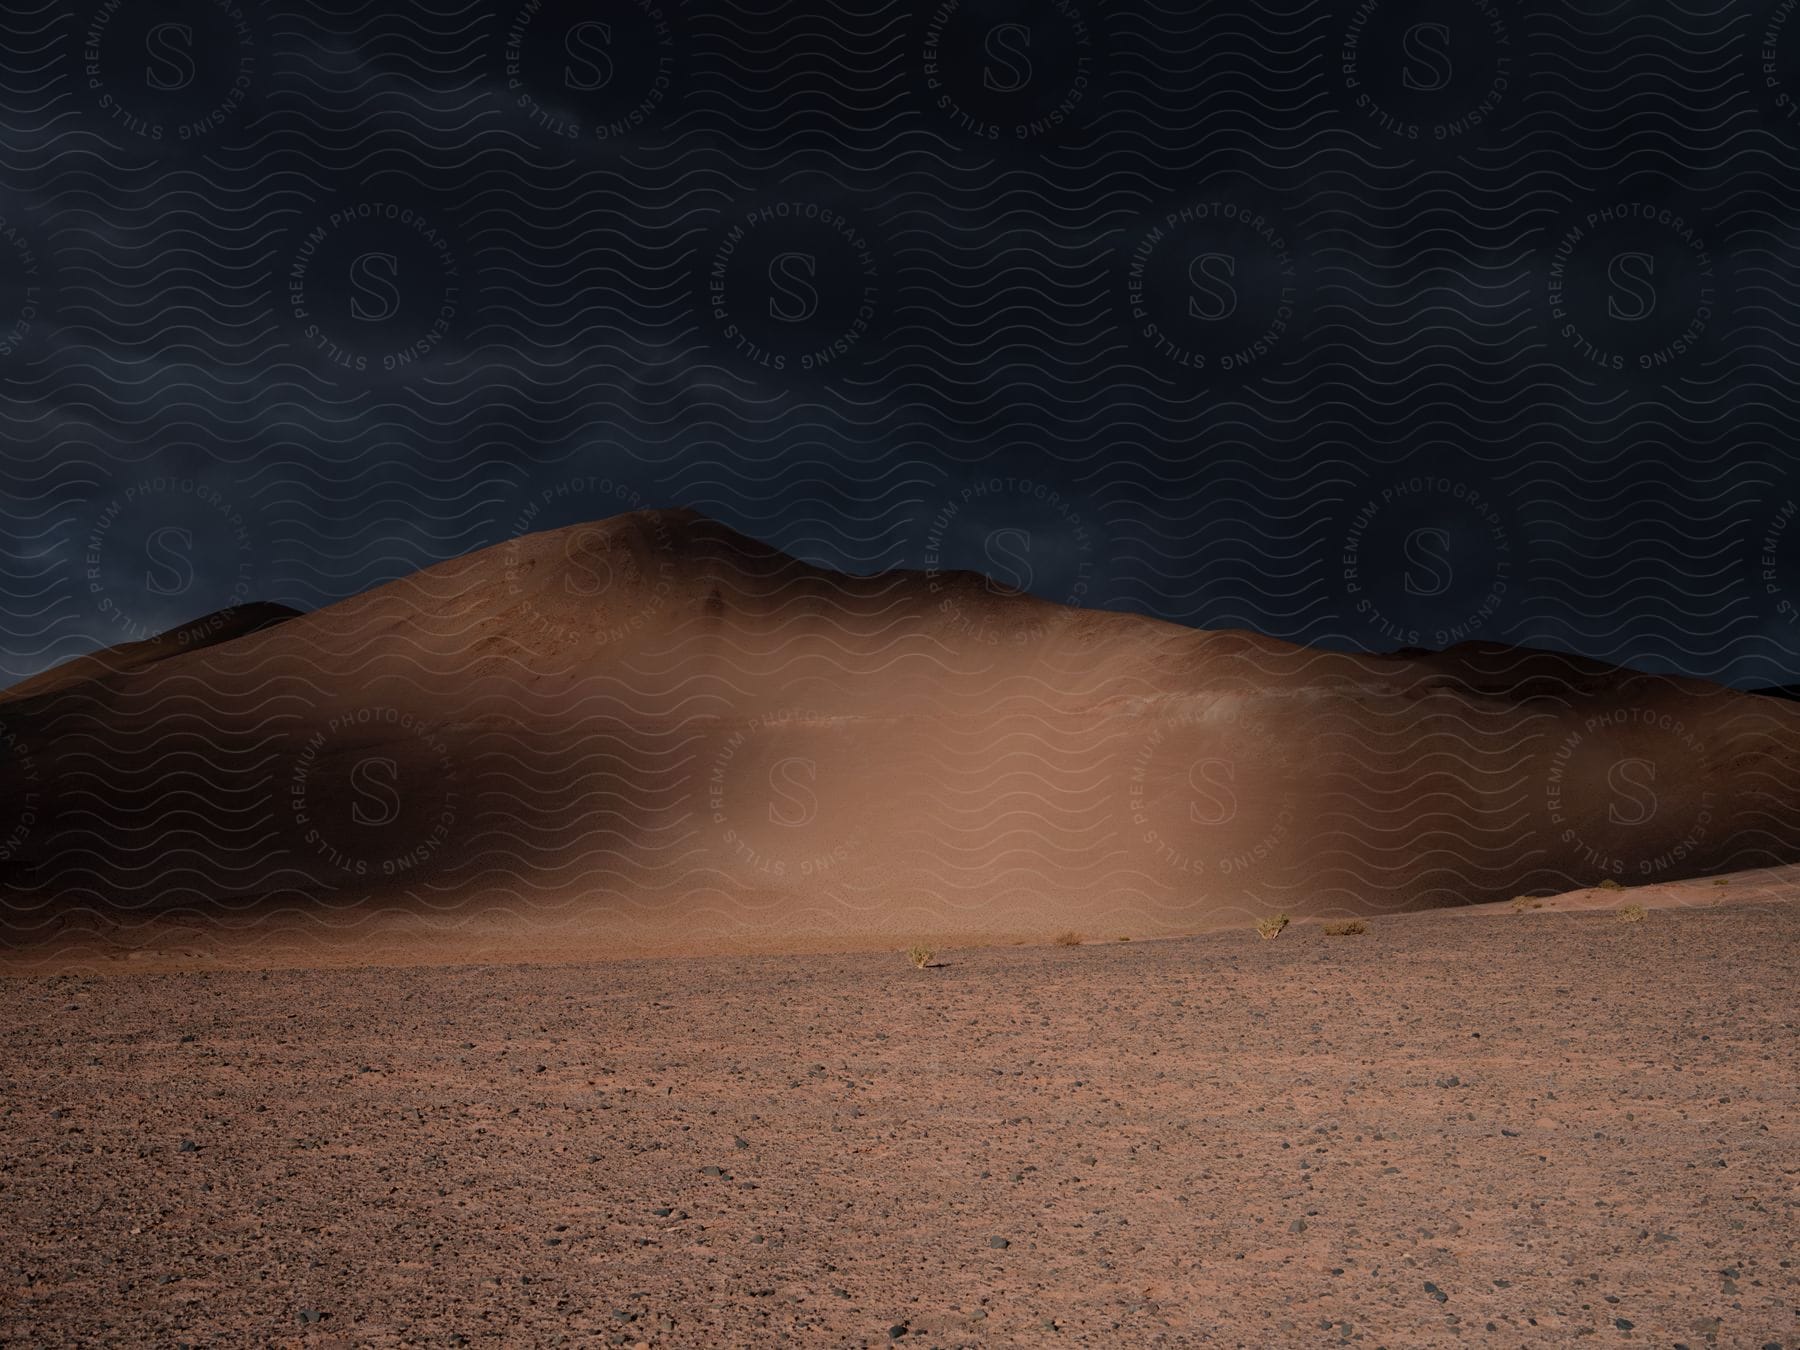 Night shot of a sand bank under heavy cloudy sky in the desert